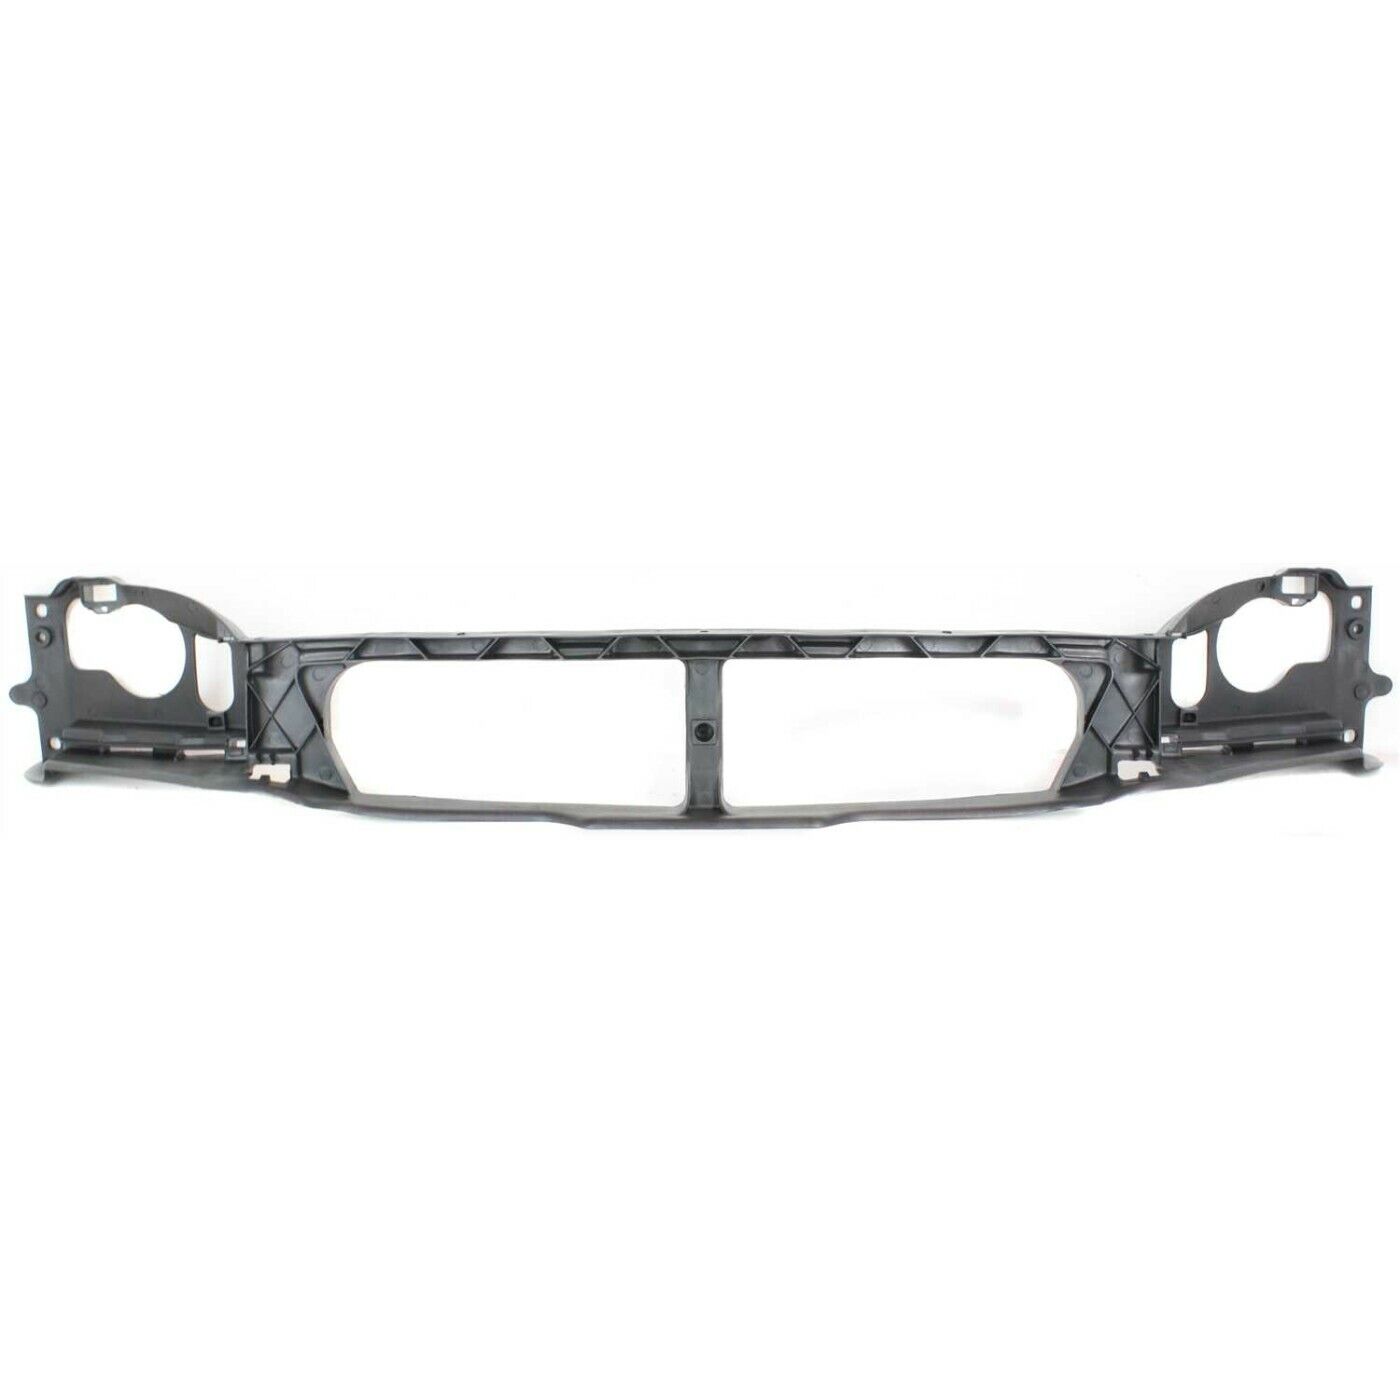 New Header Panel FO1221121 for 1999-2003 Ford Windstar